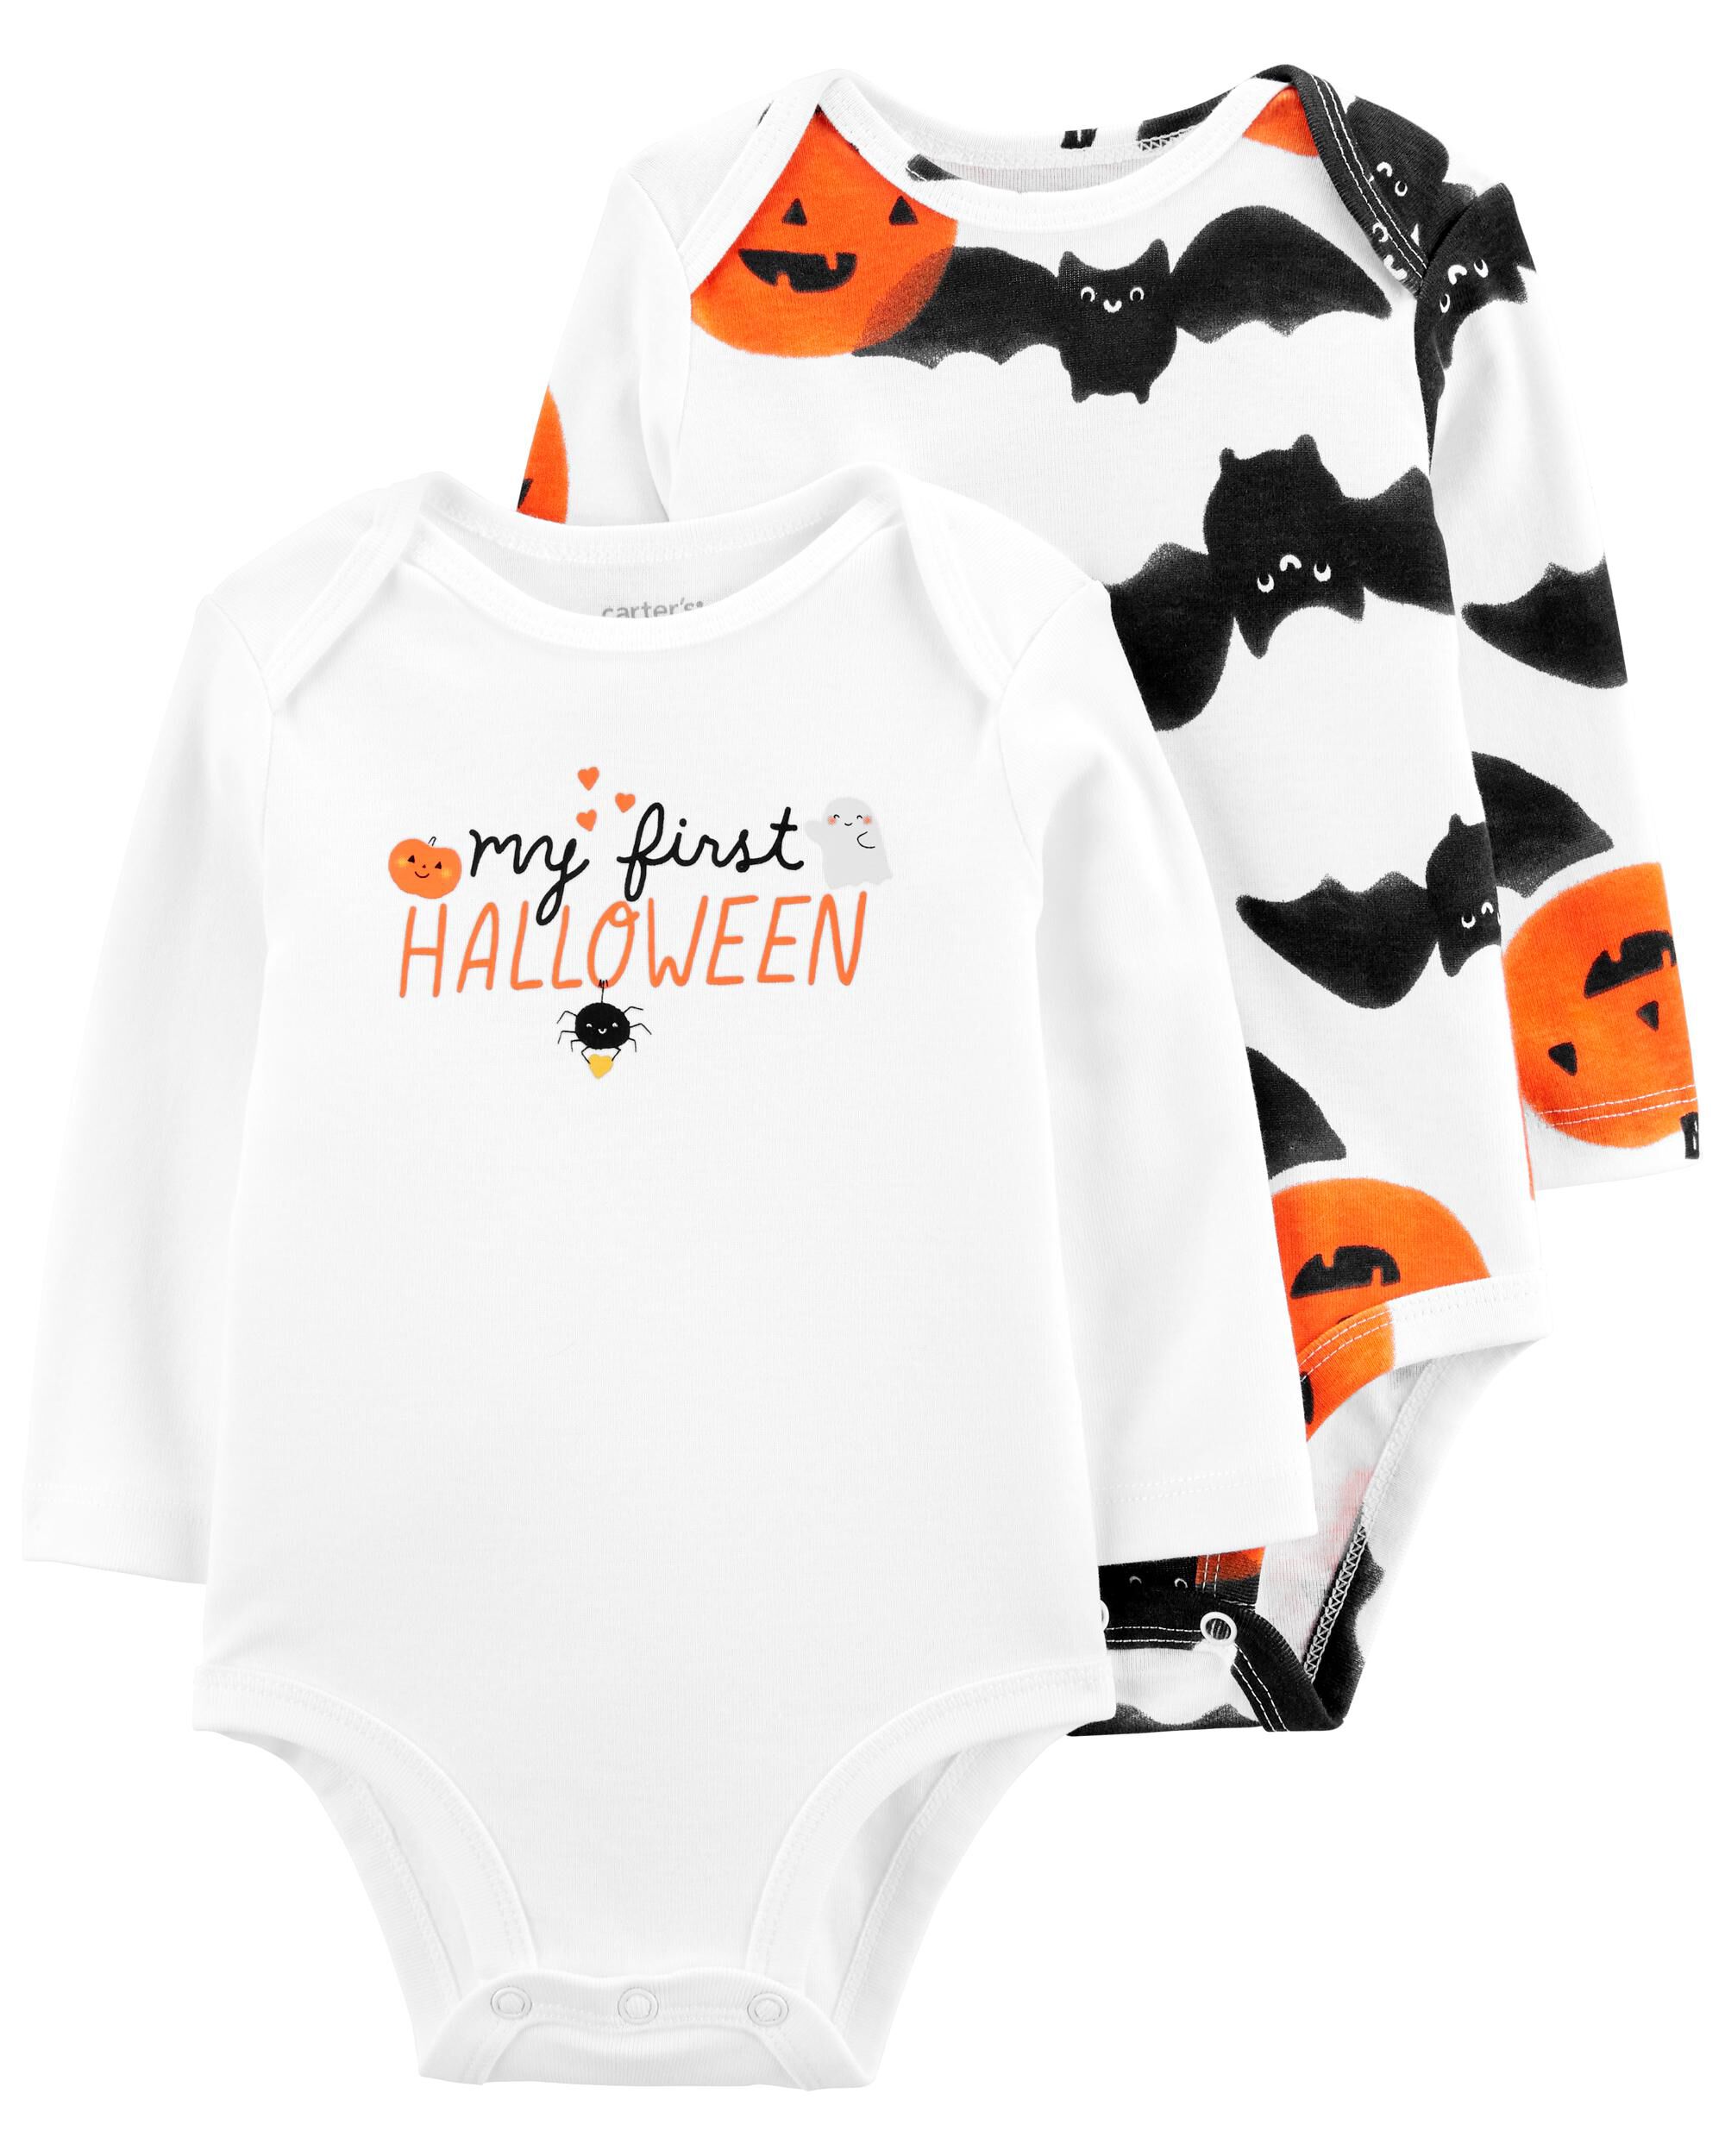 Details about   Carters First Halloween Pirate Puppy Infant Bodysuit & Plush Toy 3 or 6 Months 